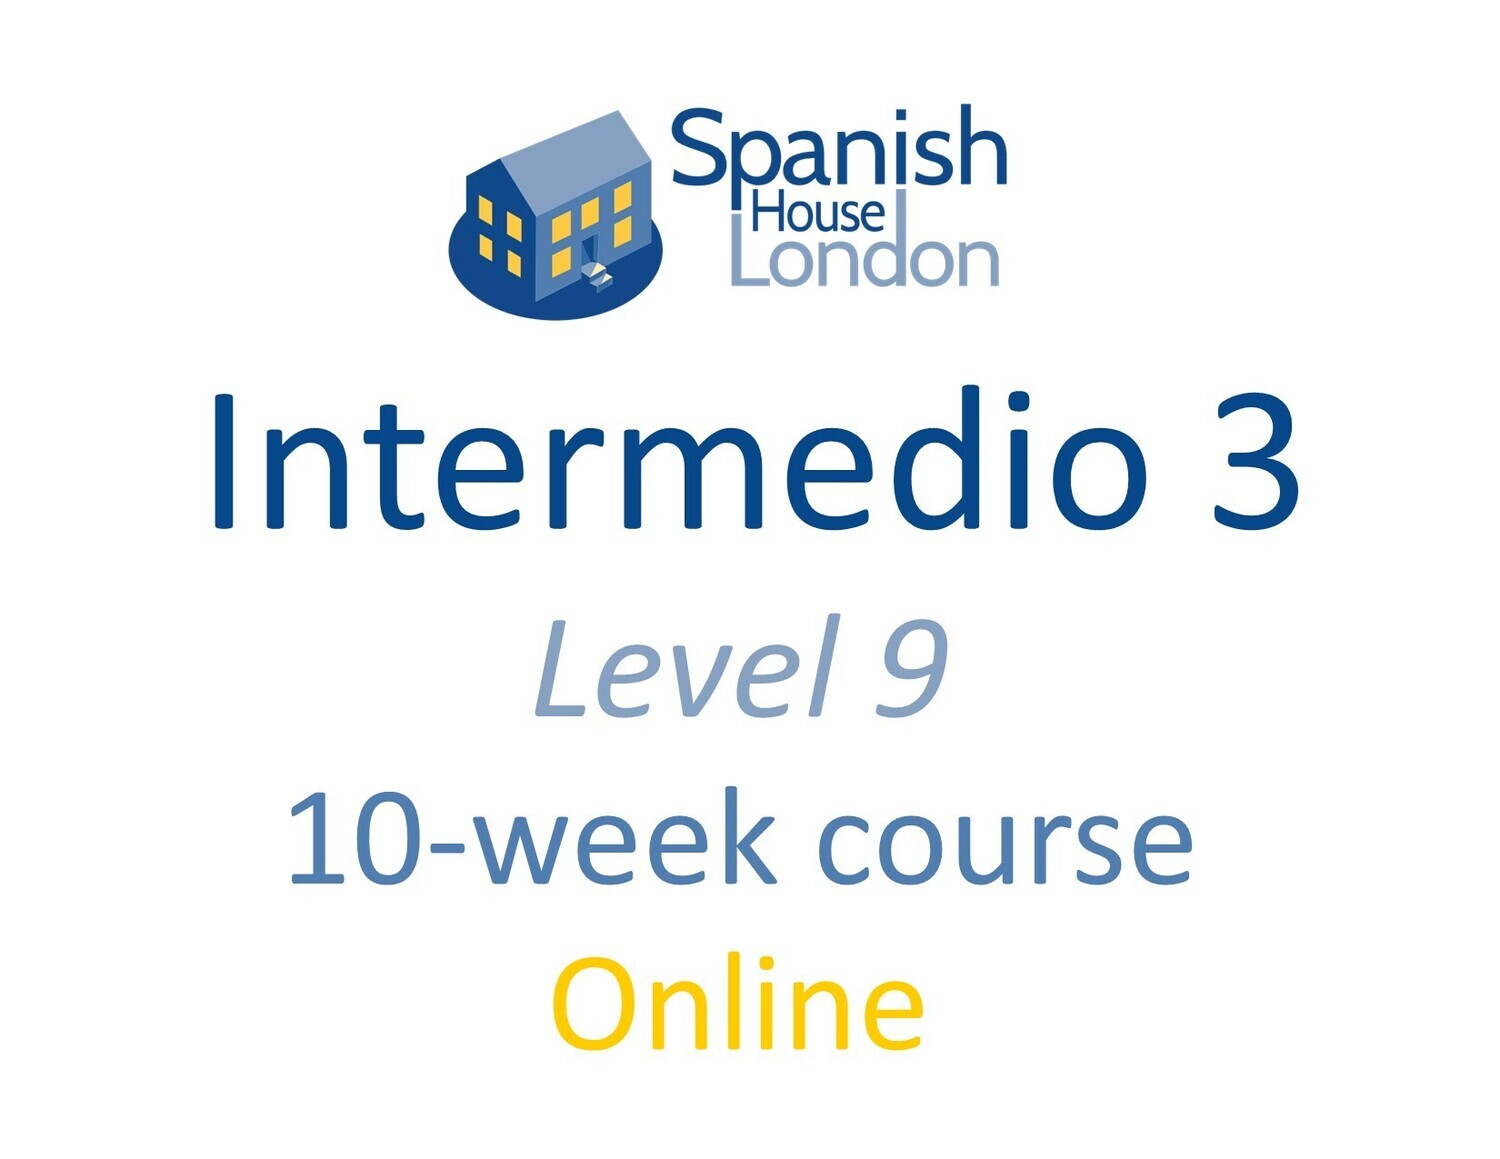 Intermedio 3 Course starting on 20th March at 6pm Online